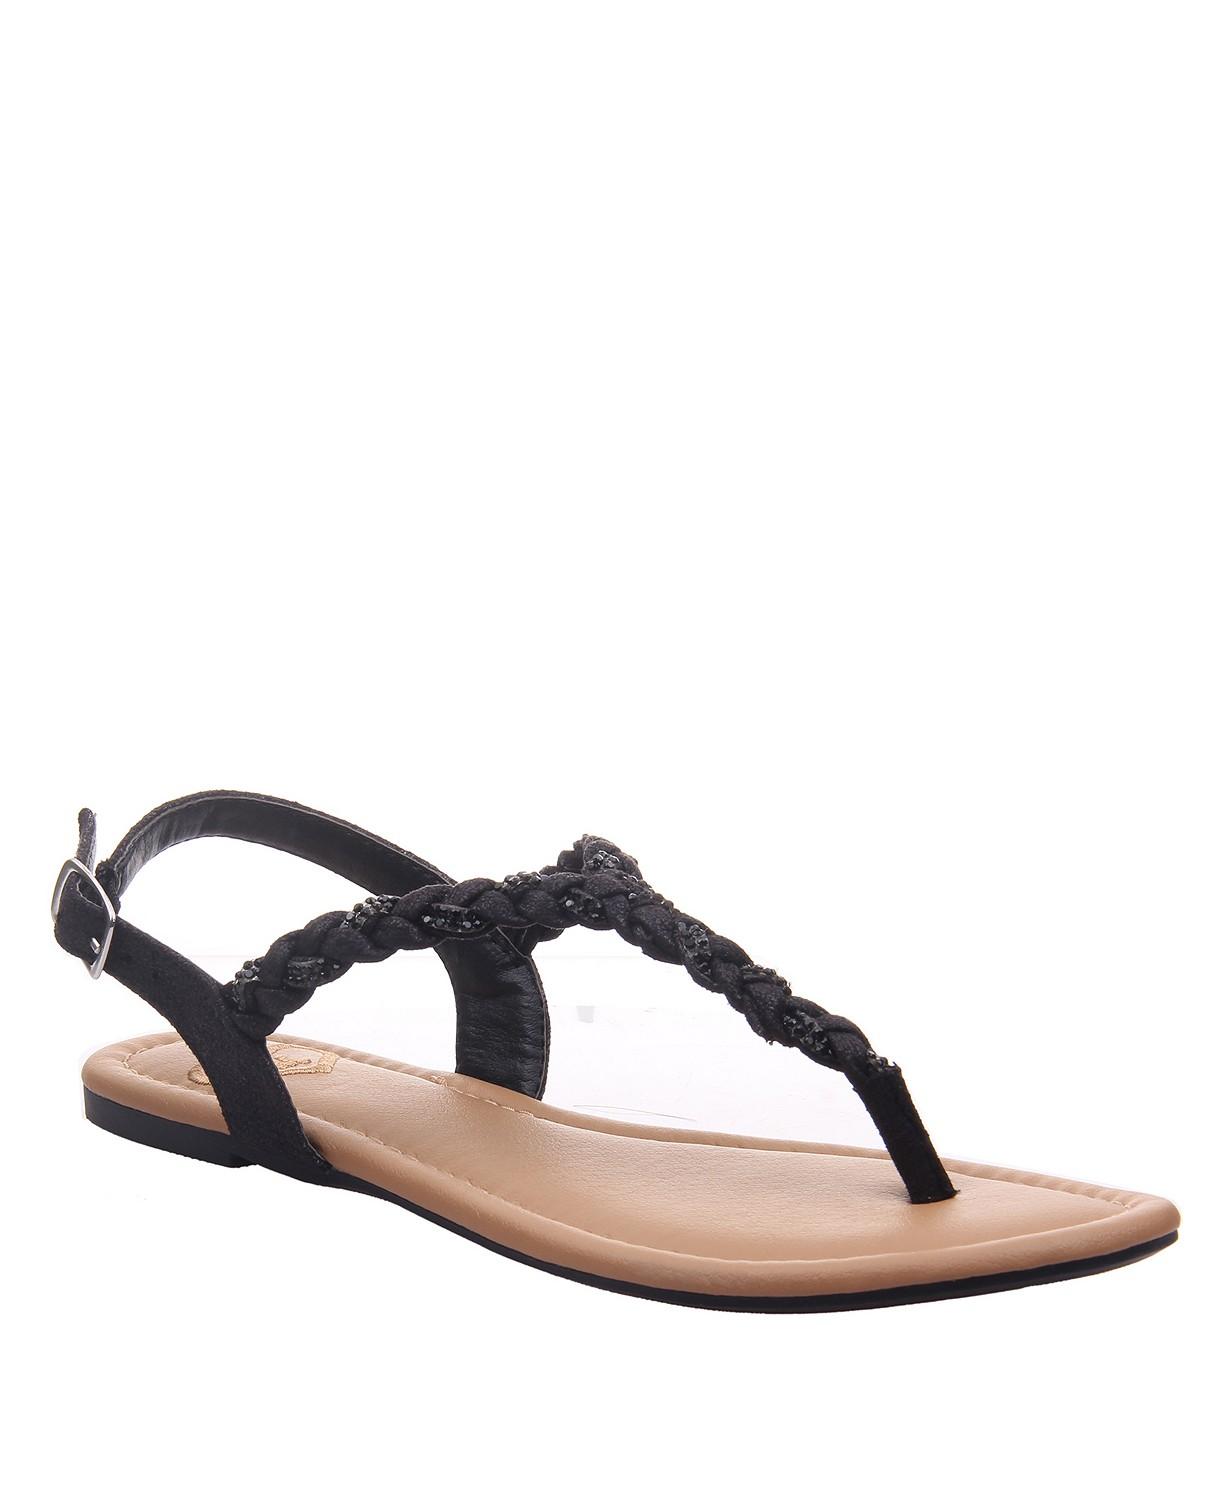 Madeline Womens Womens Charge Flat Sandals | eBay